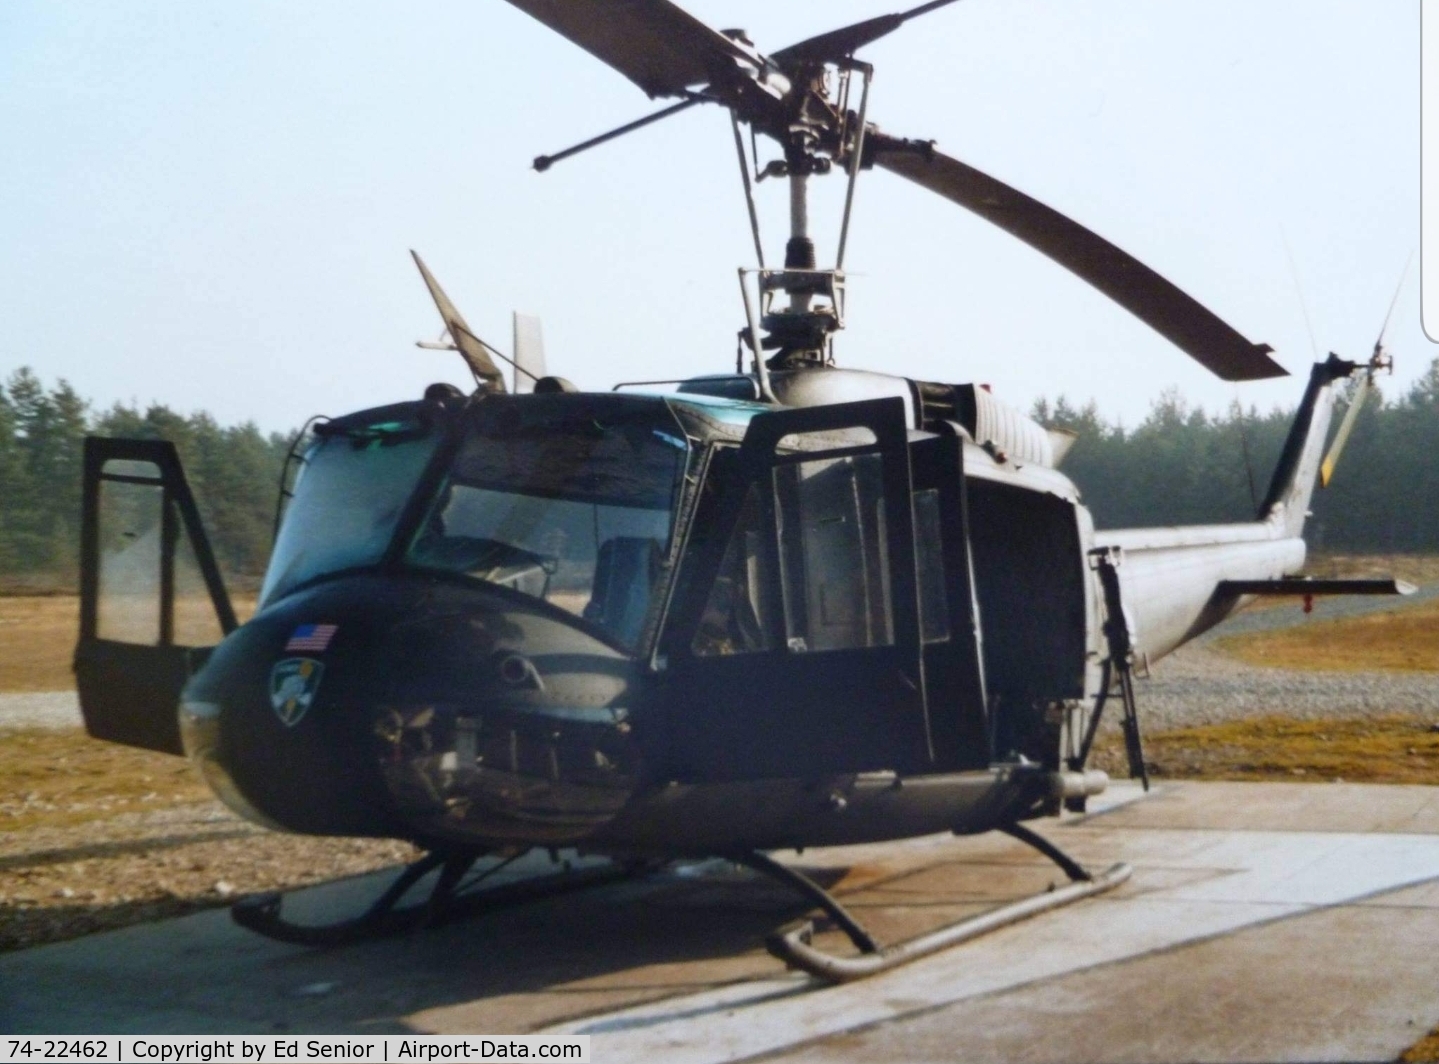 74-22462, 1974 Bell UH-1H Iroquois C/N 13786, Air gunnery range Germany 1990. Assigned 56th Aviation Co. Mannheim Germany Coleman Barracks